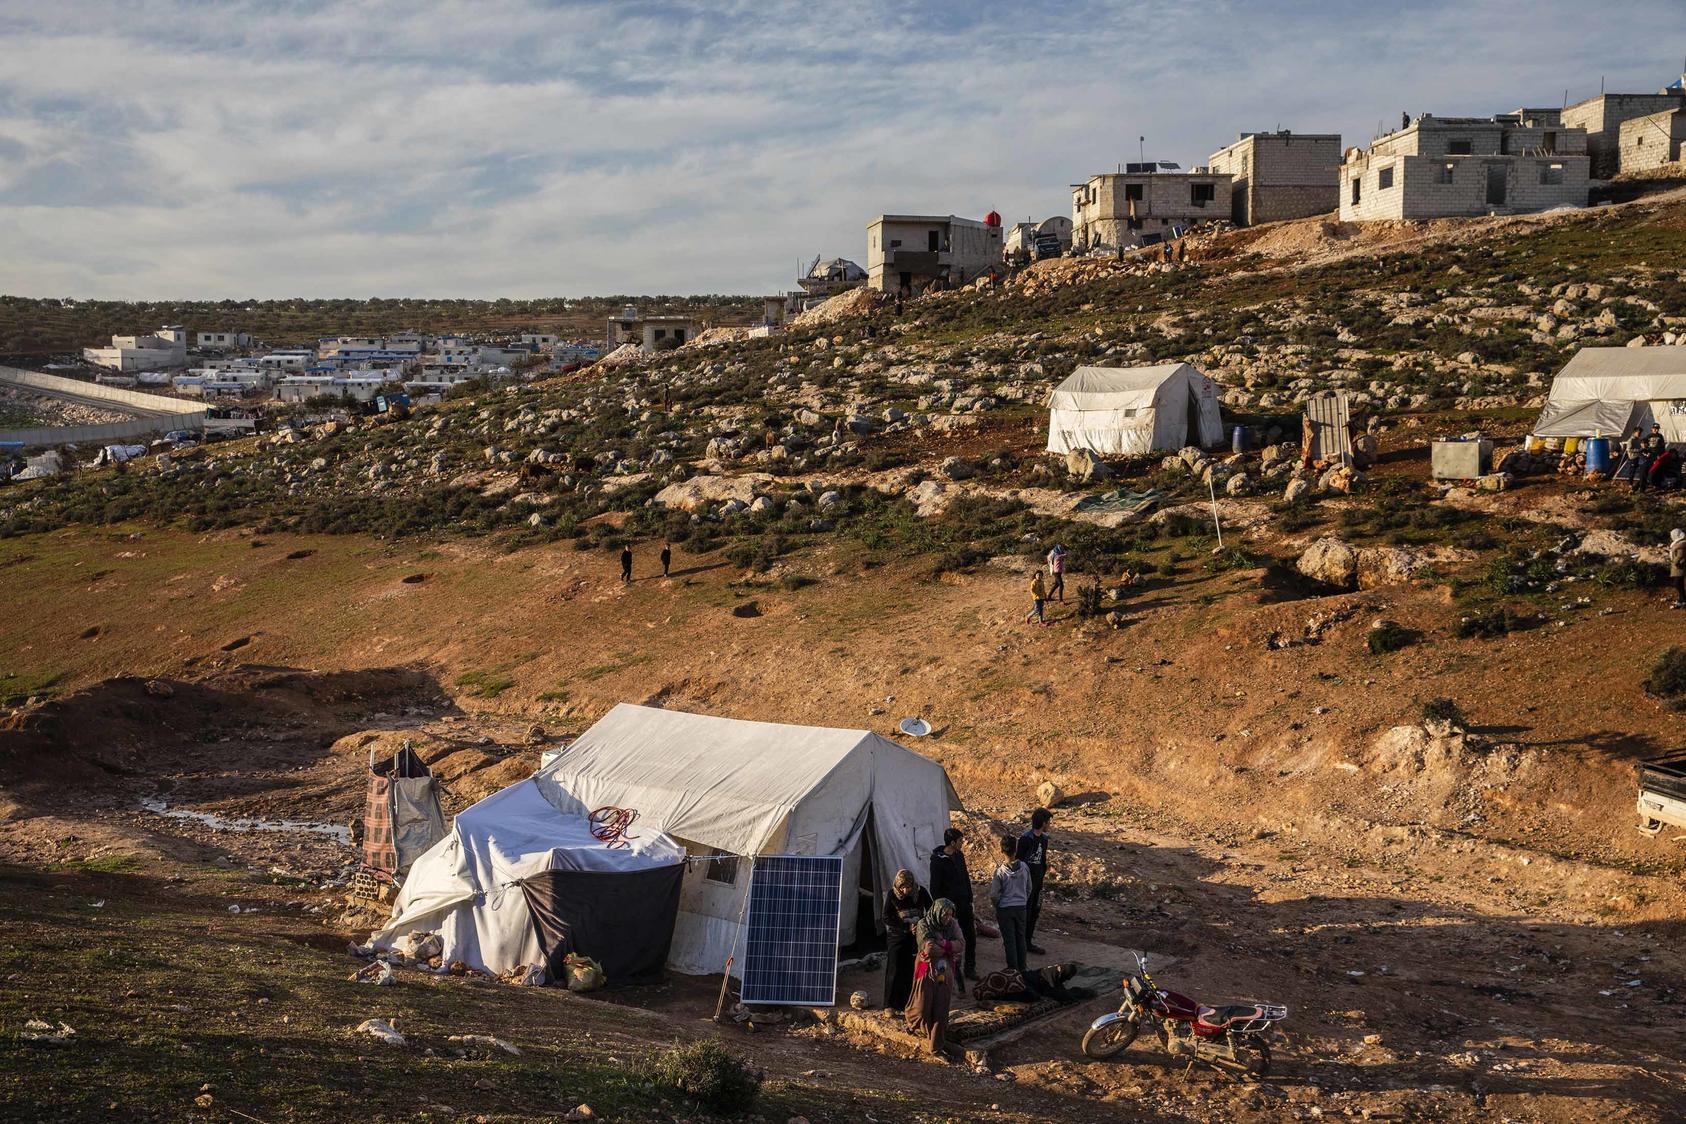 Several families share a tent pitched atop a sewer not far from Idlib, Syria, March 4, 2020. The potential closure of the last aid crossing, known as Bab al-Hawa, will exacerbate an already dire humanitarian situation. (Ivor Prickett/The New York Times)